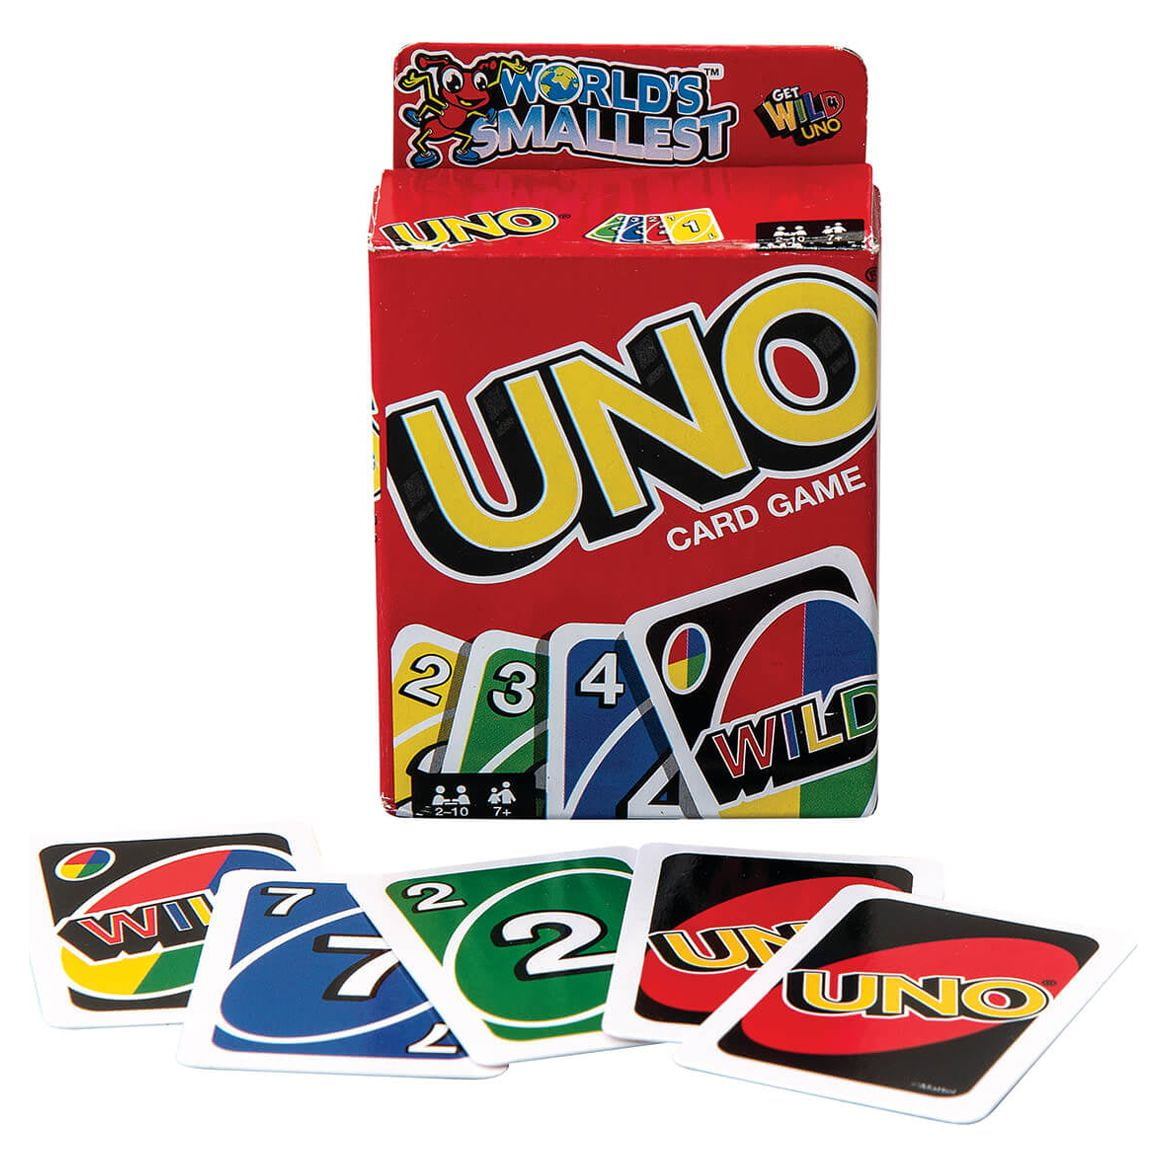 UNO All Wild» is the worst card game in the world - Galaxus